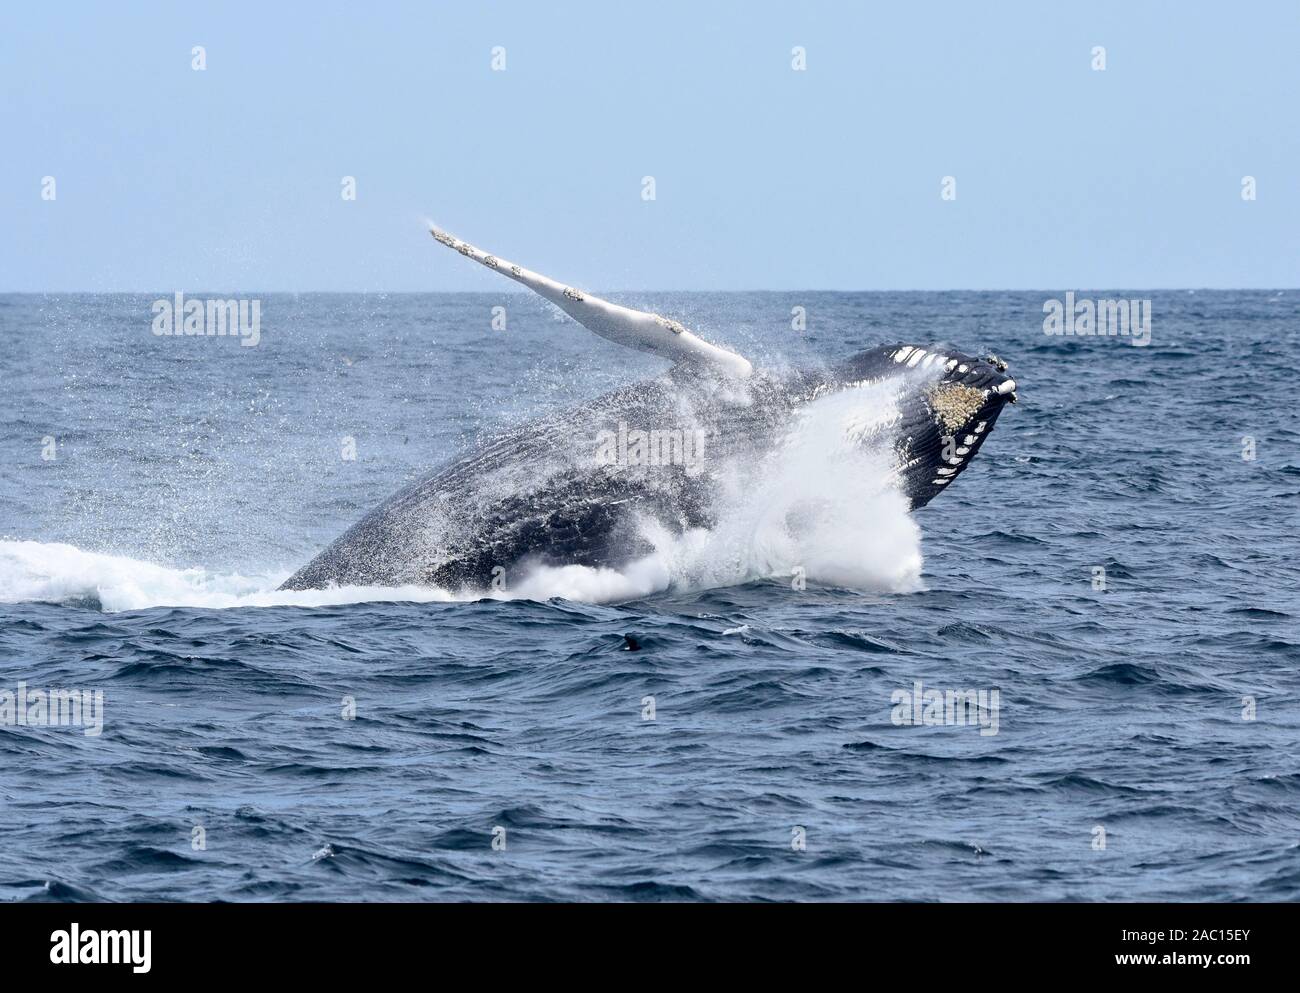 A breaching humpback whale hits the water on the way down with a big splash. (Megaptera novaeangliae) Stock Photo